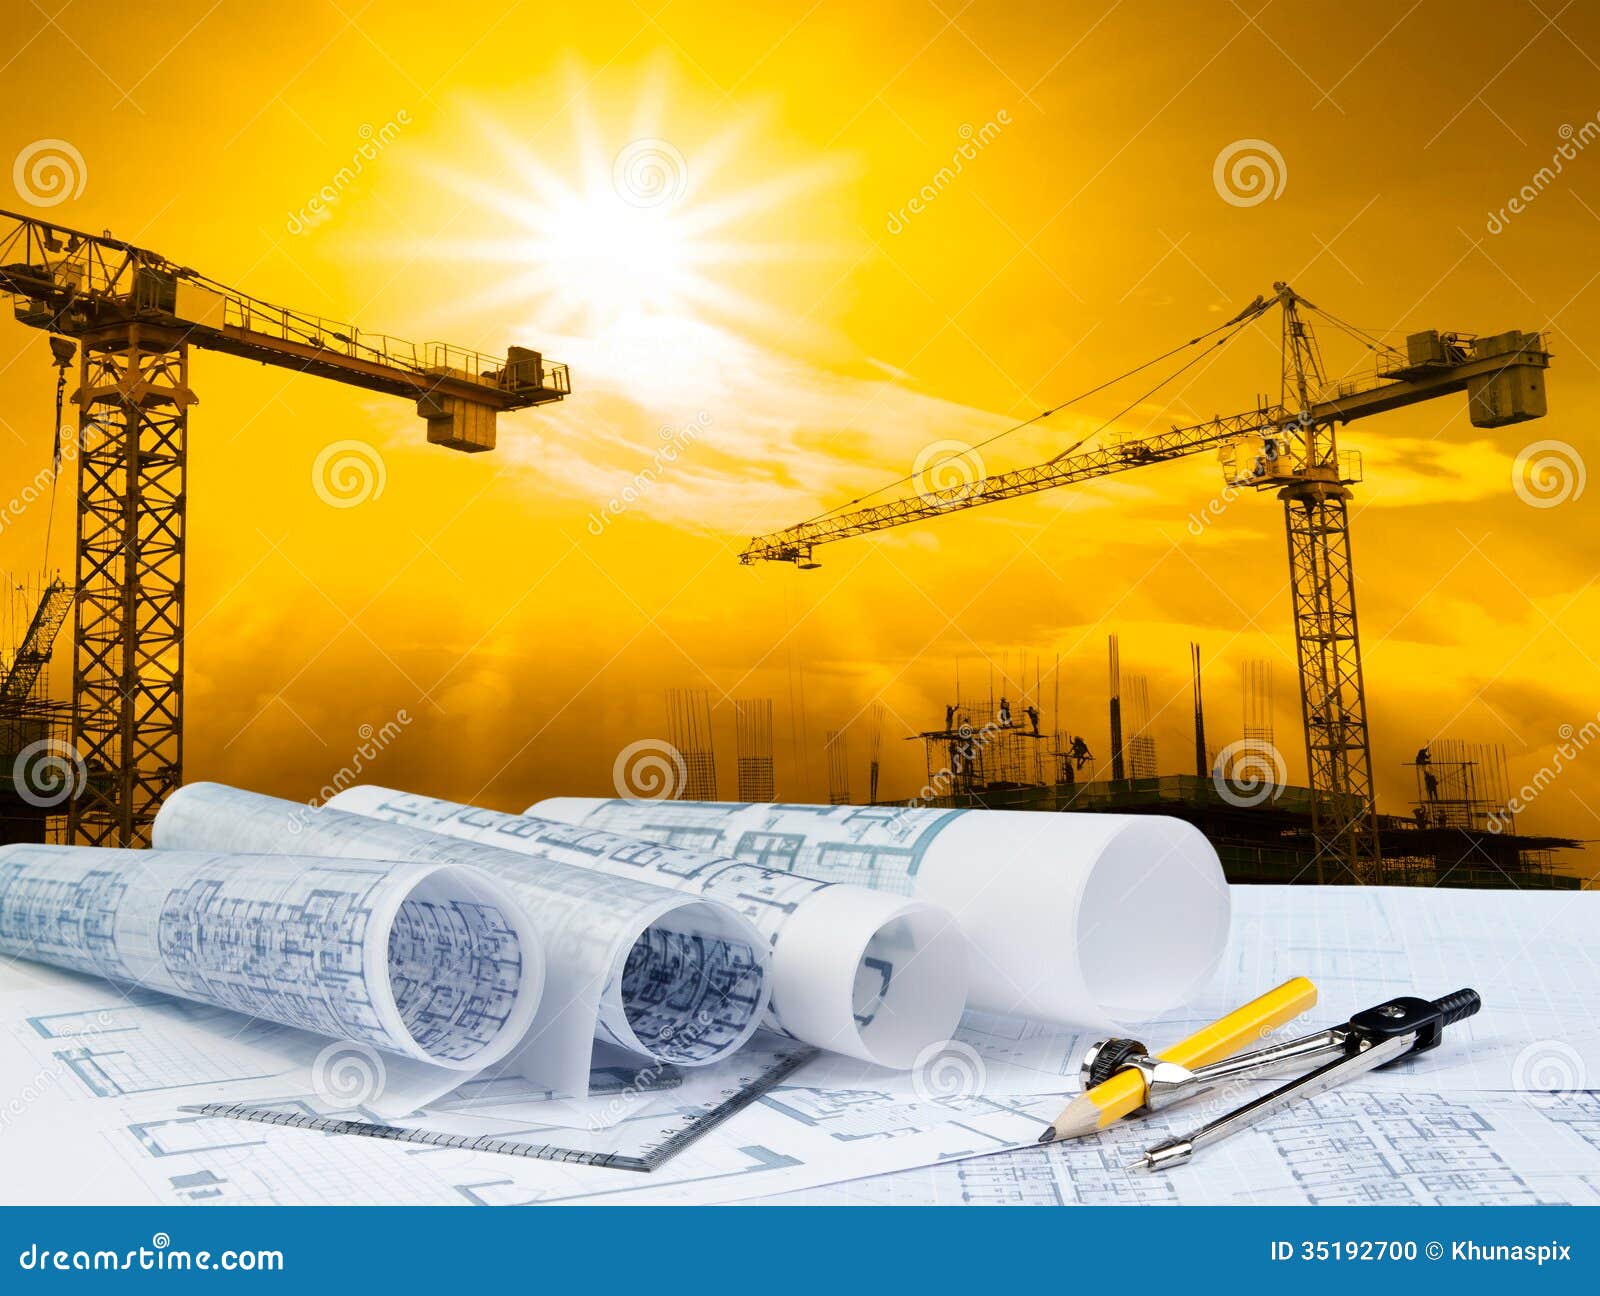 architect plan on working table with crane and building construction background